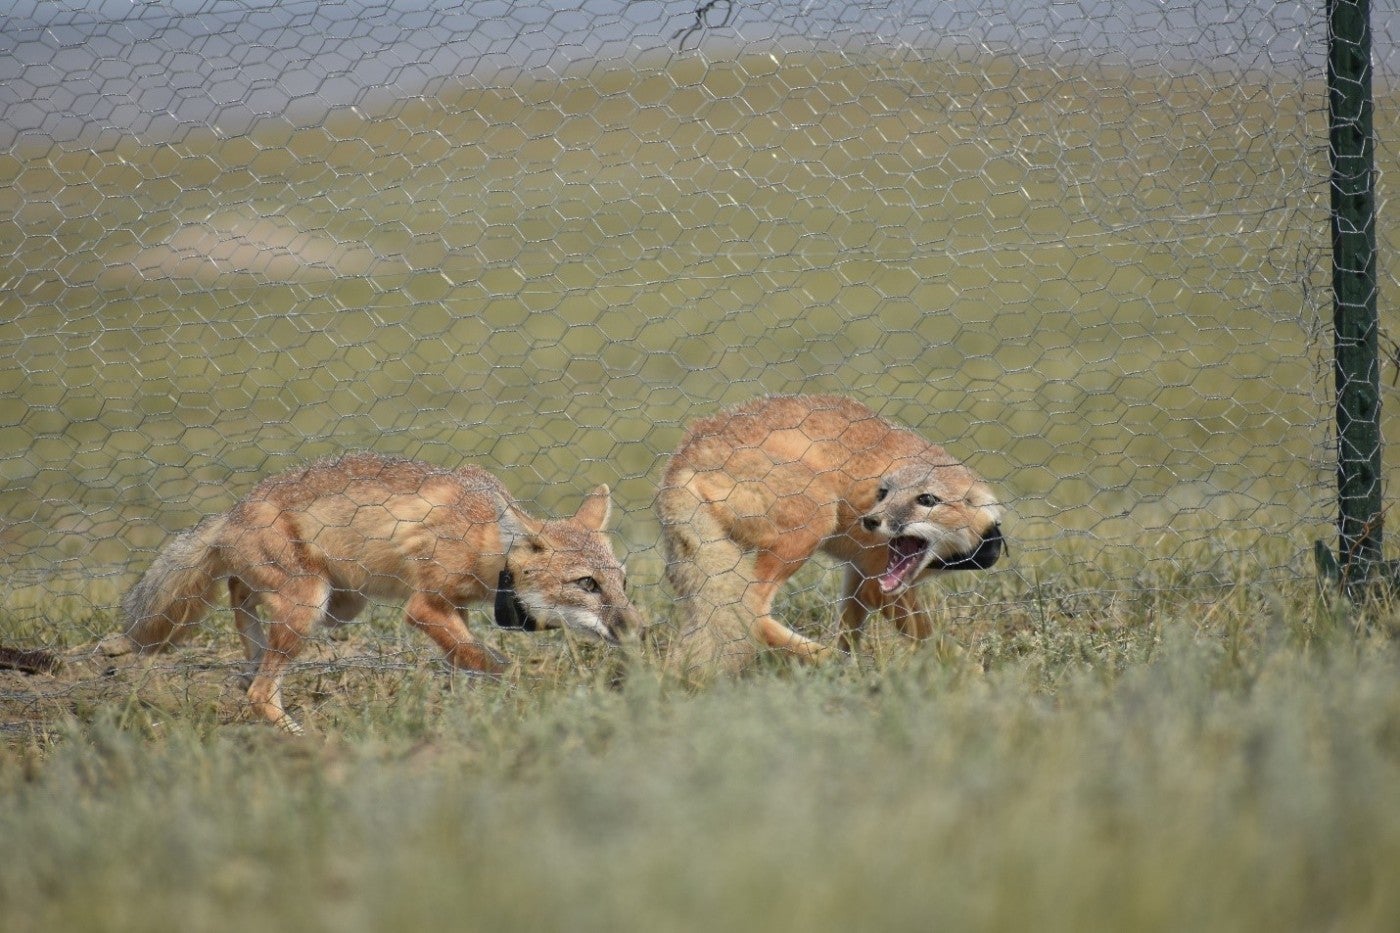 Photo of two swift foxes inside of a mesh enclosure. Both foxes are collared and one fox has its ears drawn back and its mouth open.